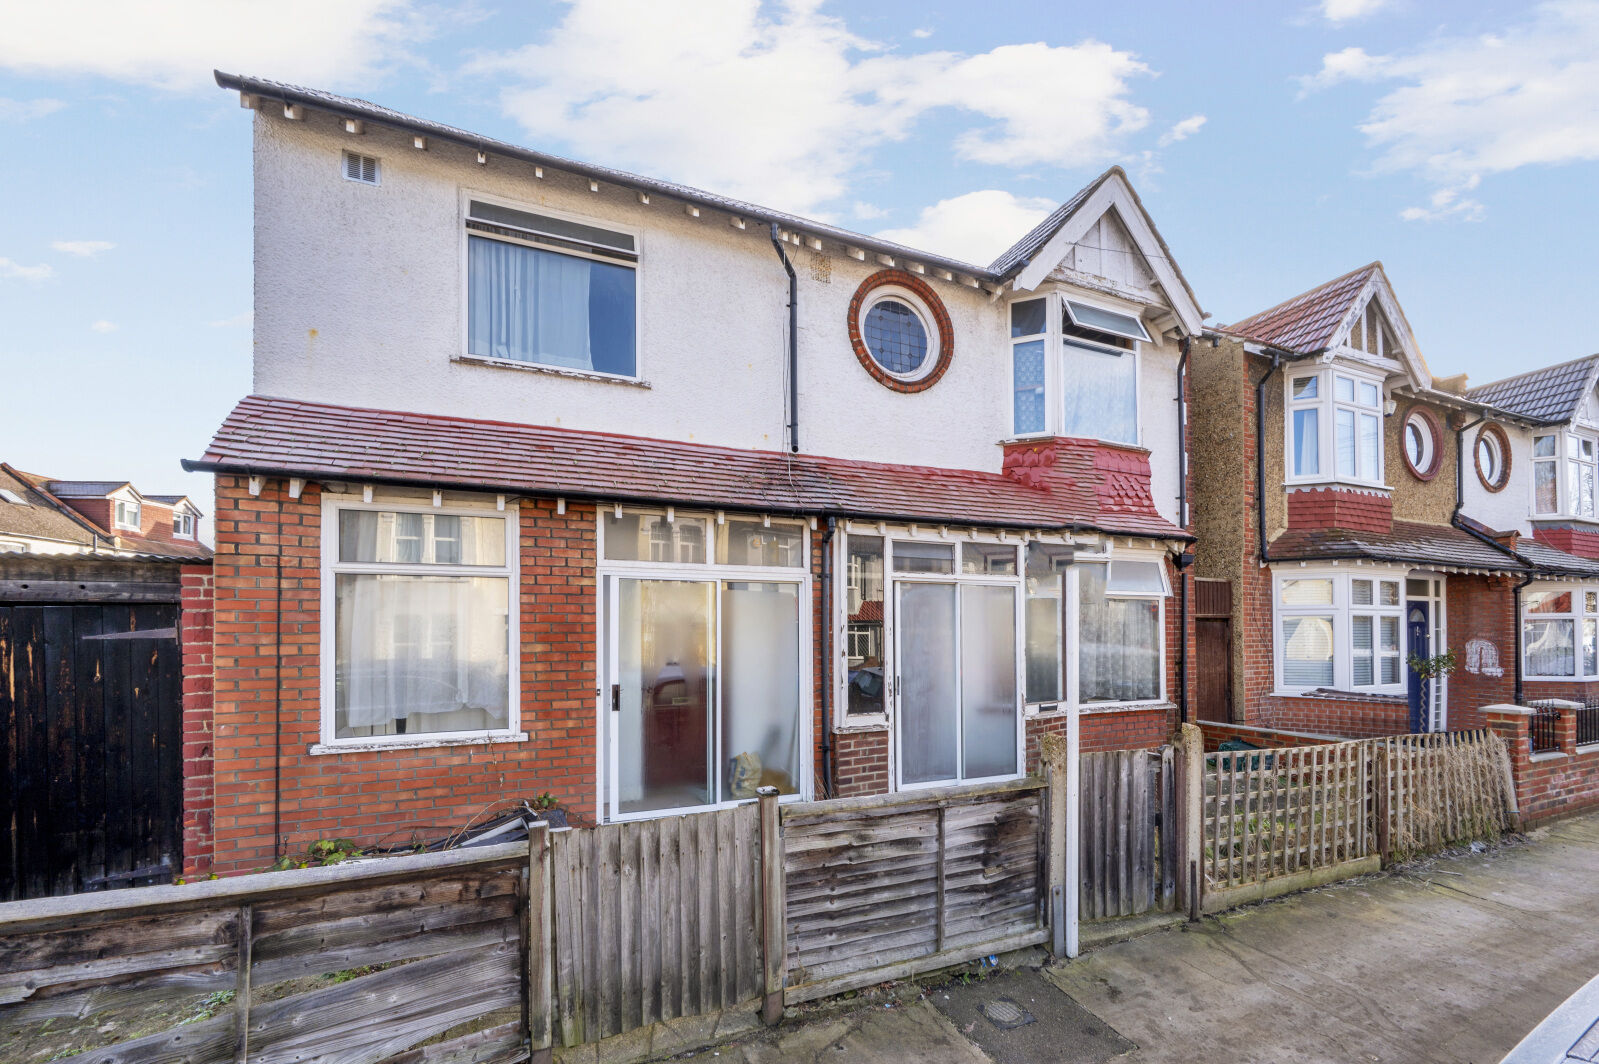 3 bedroom mid terraced house for sale Seaforth Avenue, New Malden, KT3, main image